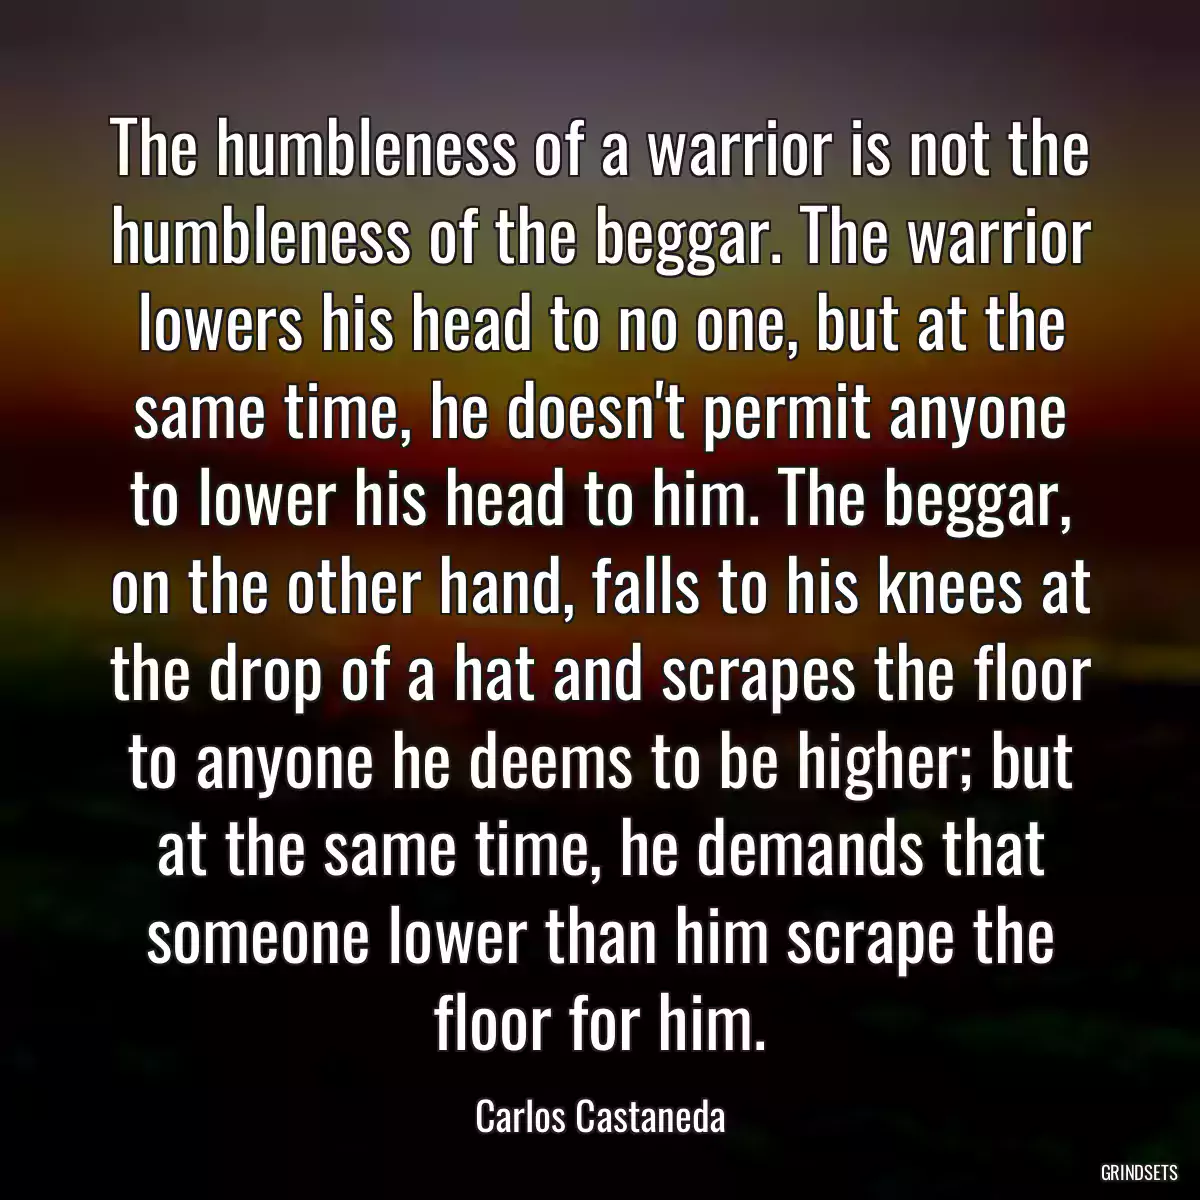 The humbleness of a warrior is not the humbleness of the beggar. The warrior lowers his head to no one, but at the same time, he doesn\'t permit anyone to lower his head to him. The beggar, on the other hand, falls to his knees at the drop of a hat and scrapes the floor to anyone he deems to be higher; but at the same time, he demands that someone lower than him scrape the floor for him.